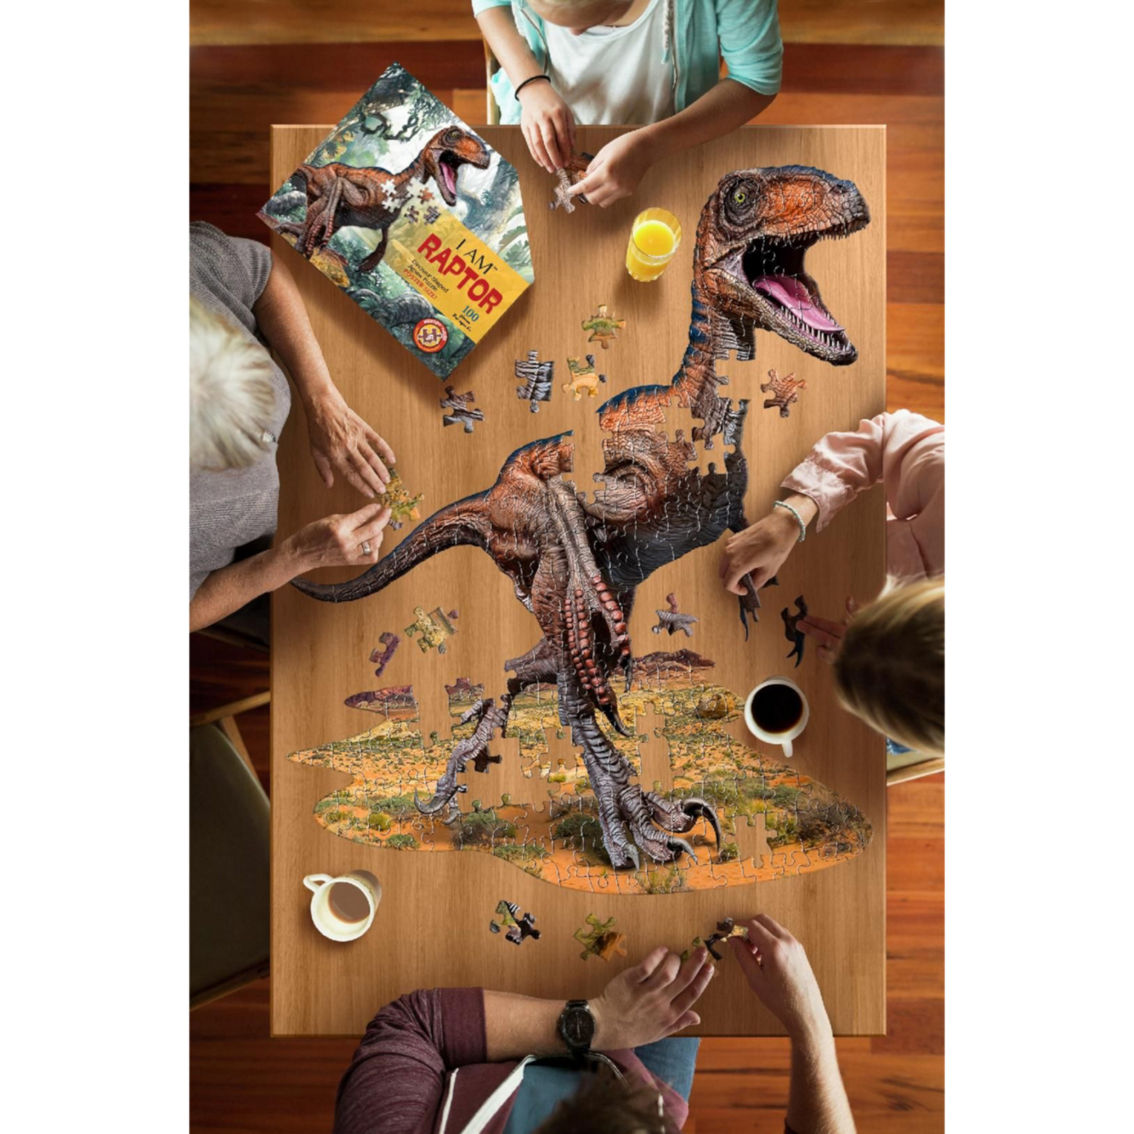 Madd Capp Jr: I Am LiL' Raptor 100 pc. Puzzle - Image 4 of 4